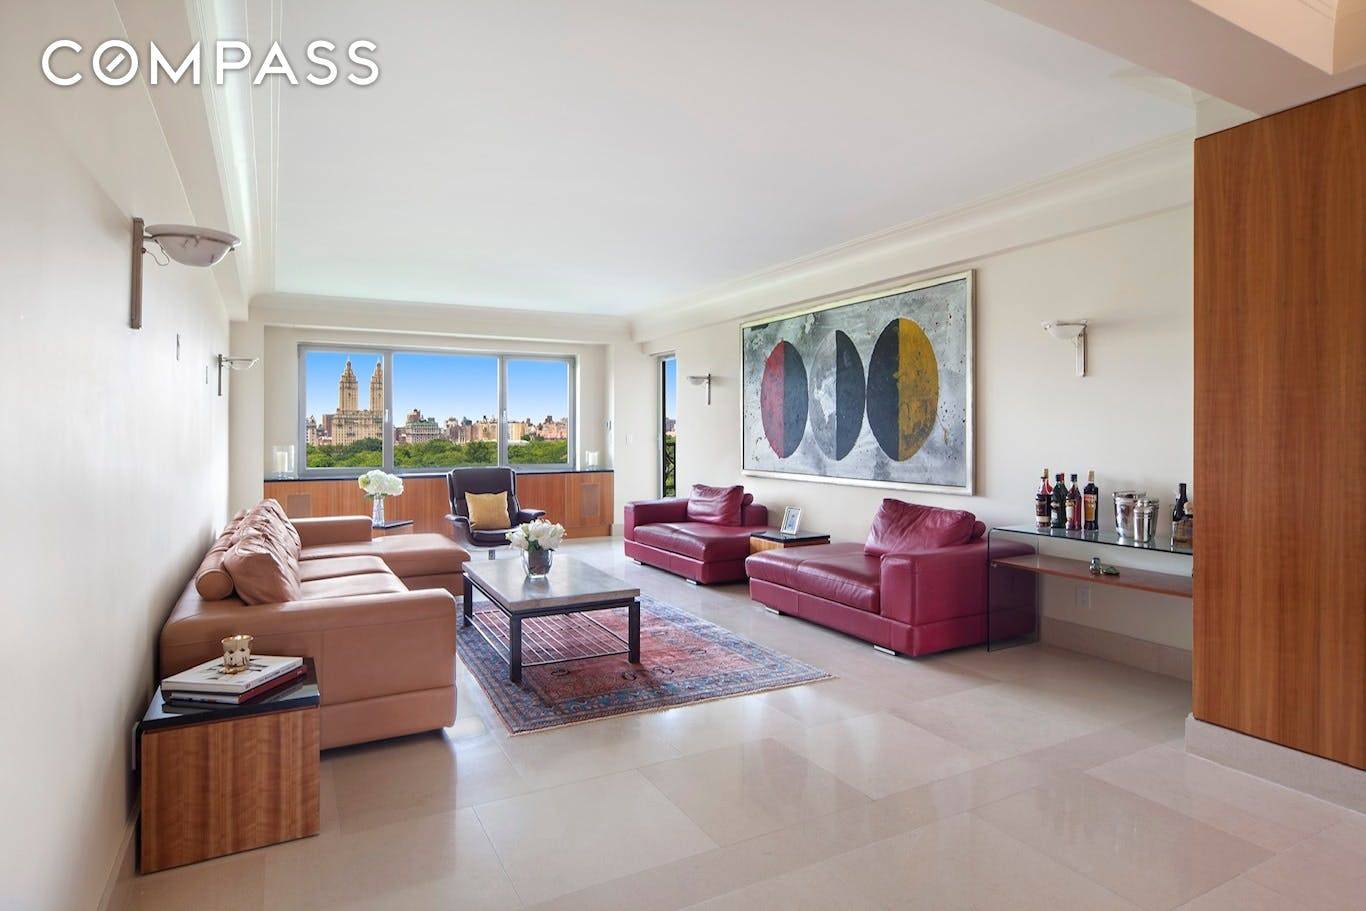 XXXMINT, superb renovation amp ; finishes, with spectacular views of Central Park, iconic Manhattan skyline and Fifth Ave.